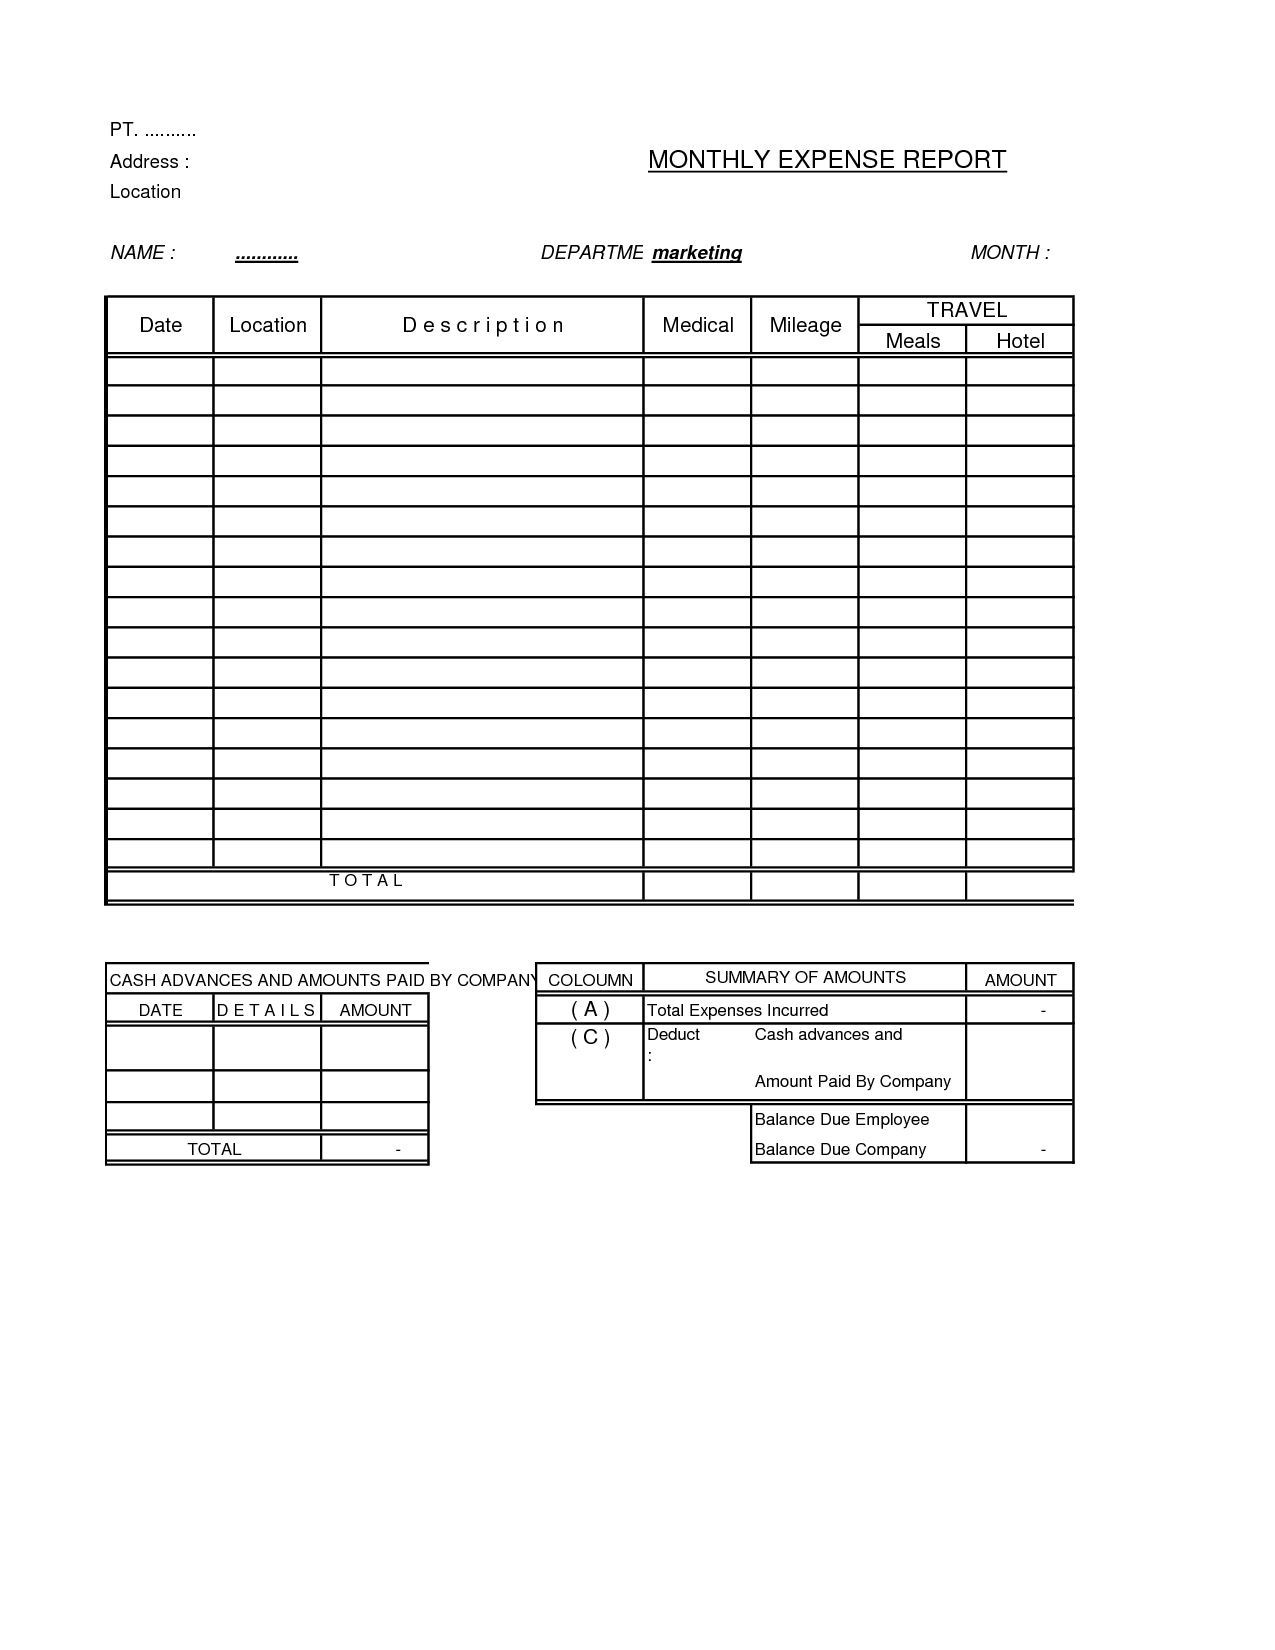 Expense Report Form And Samples For Your Inspirations For Company Expense Report Template